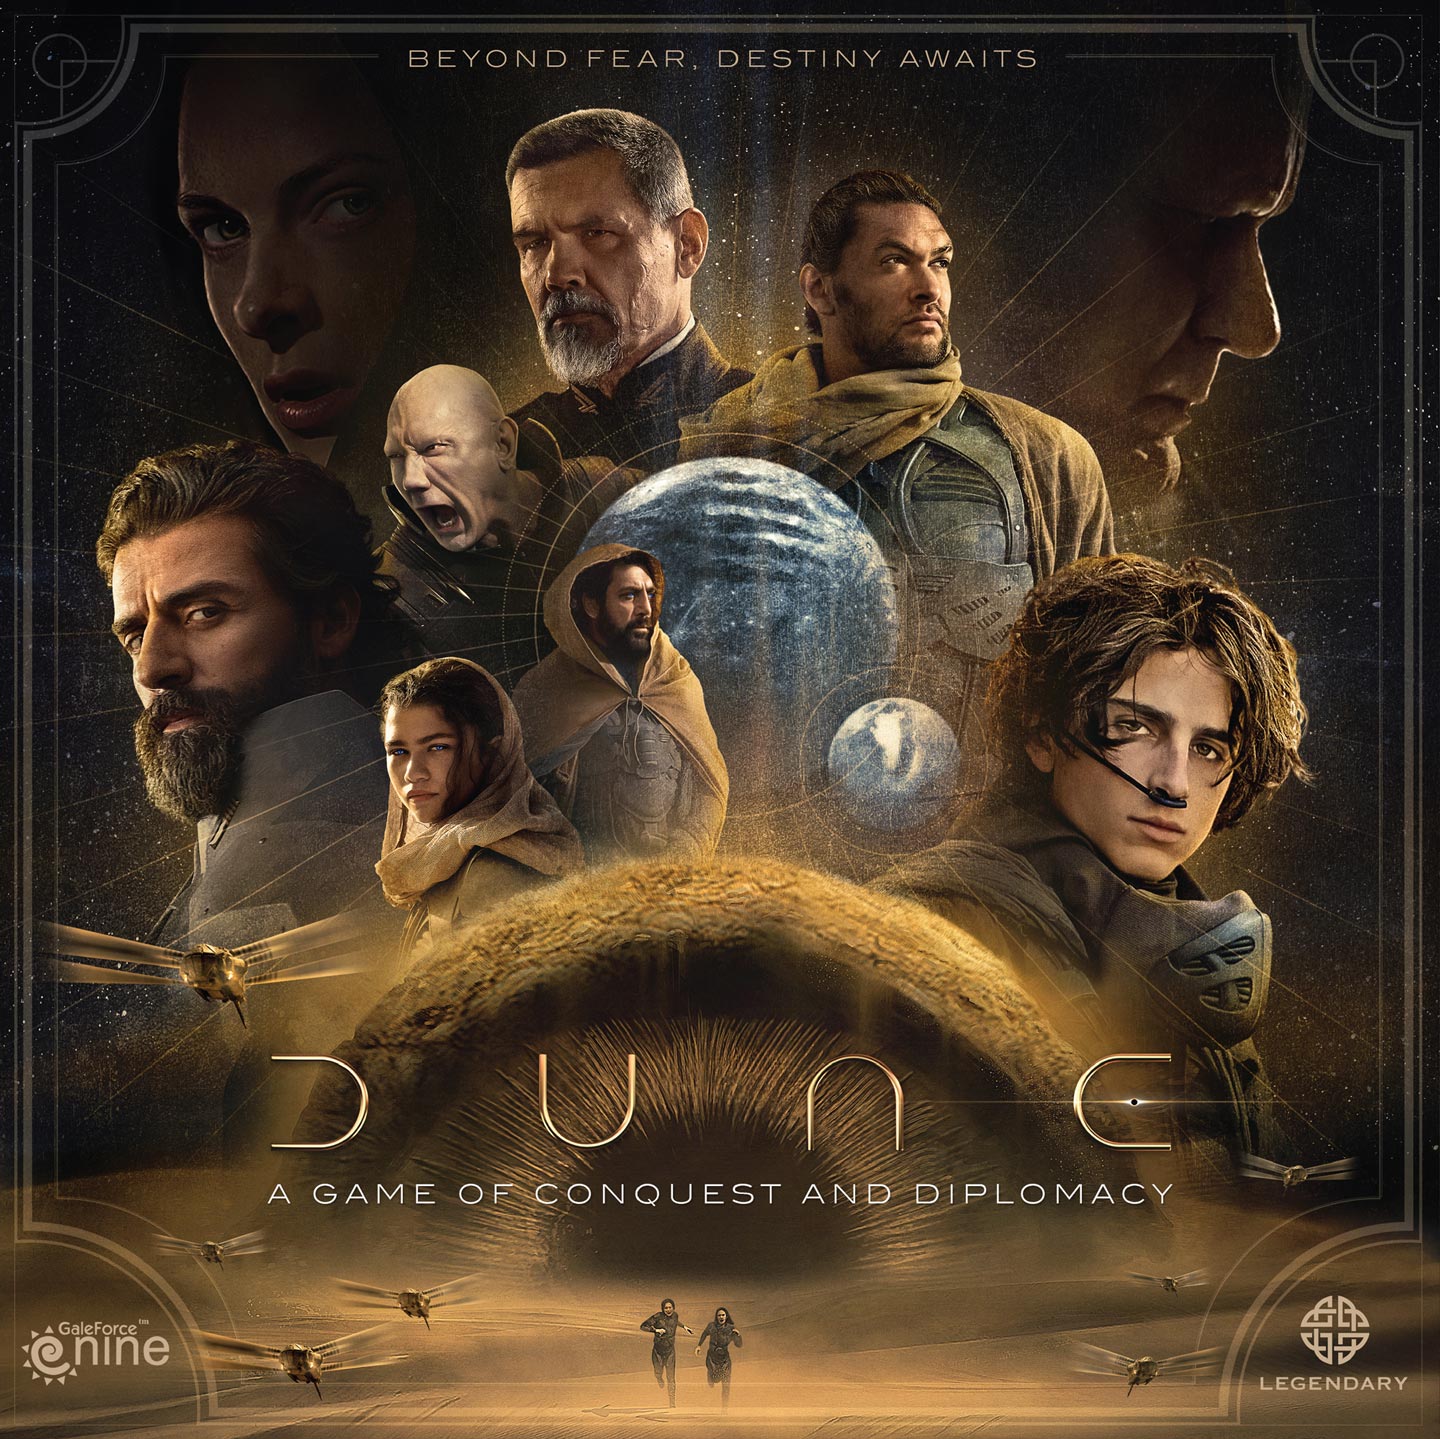 Top box art for 'Dune, A Game of Conquest and Diplomacy' from Gale Force Nine, featuring the actors and visuals from the Dune (2021) movie.